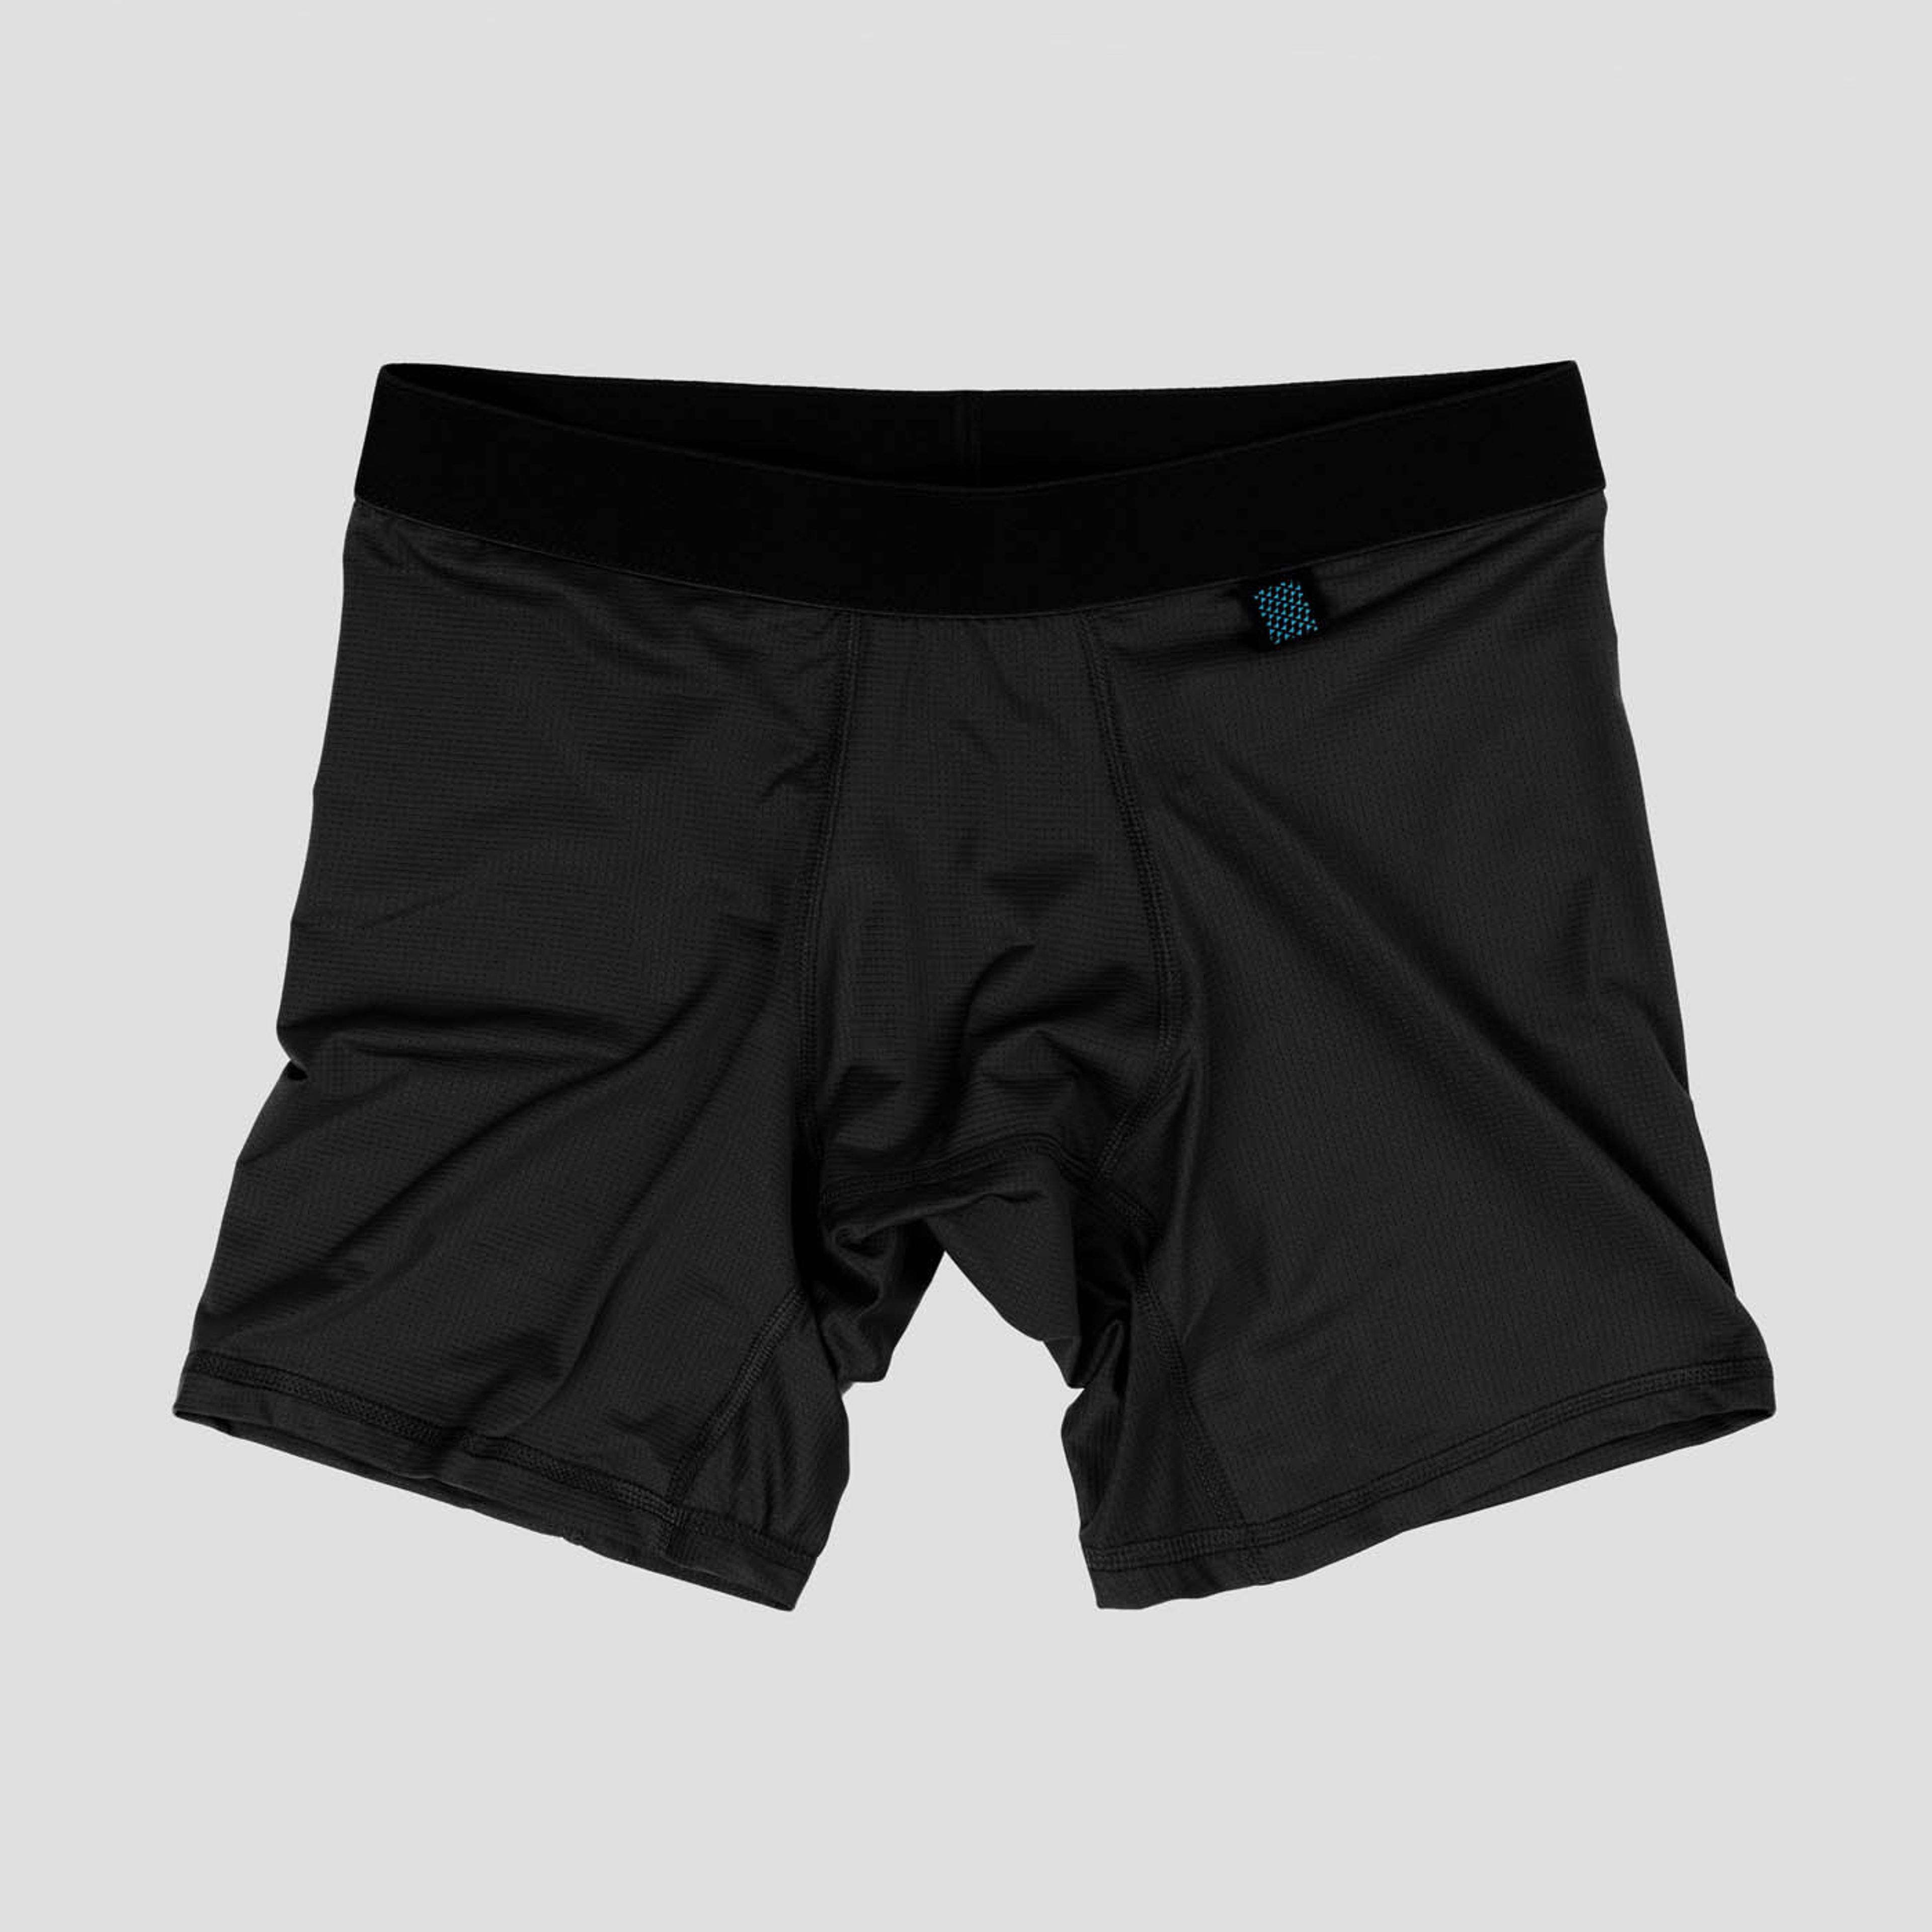 TOMBOYX FIRST LINE LEAKPROOF 9 BOXER BRIEFS : r/PeriodUnderwear